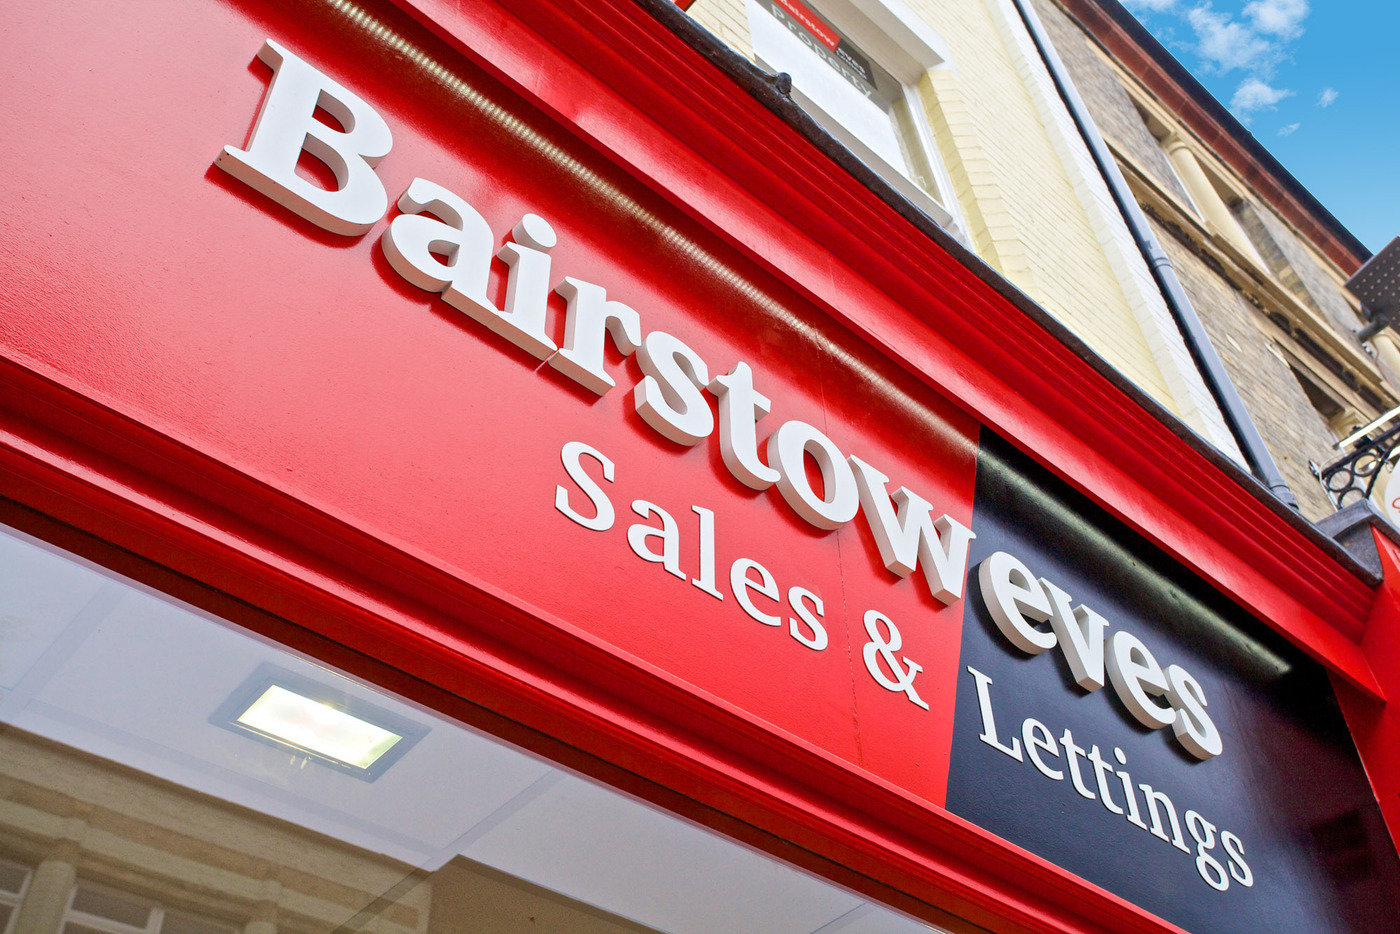 Bairstow Eves Sales and Letting Agents Peterborough Peterborough 01733 785024